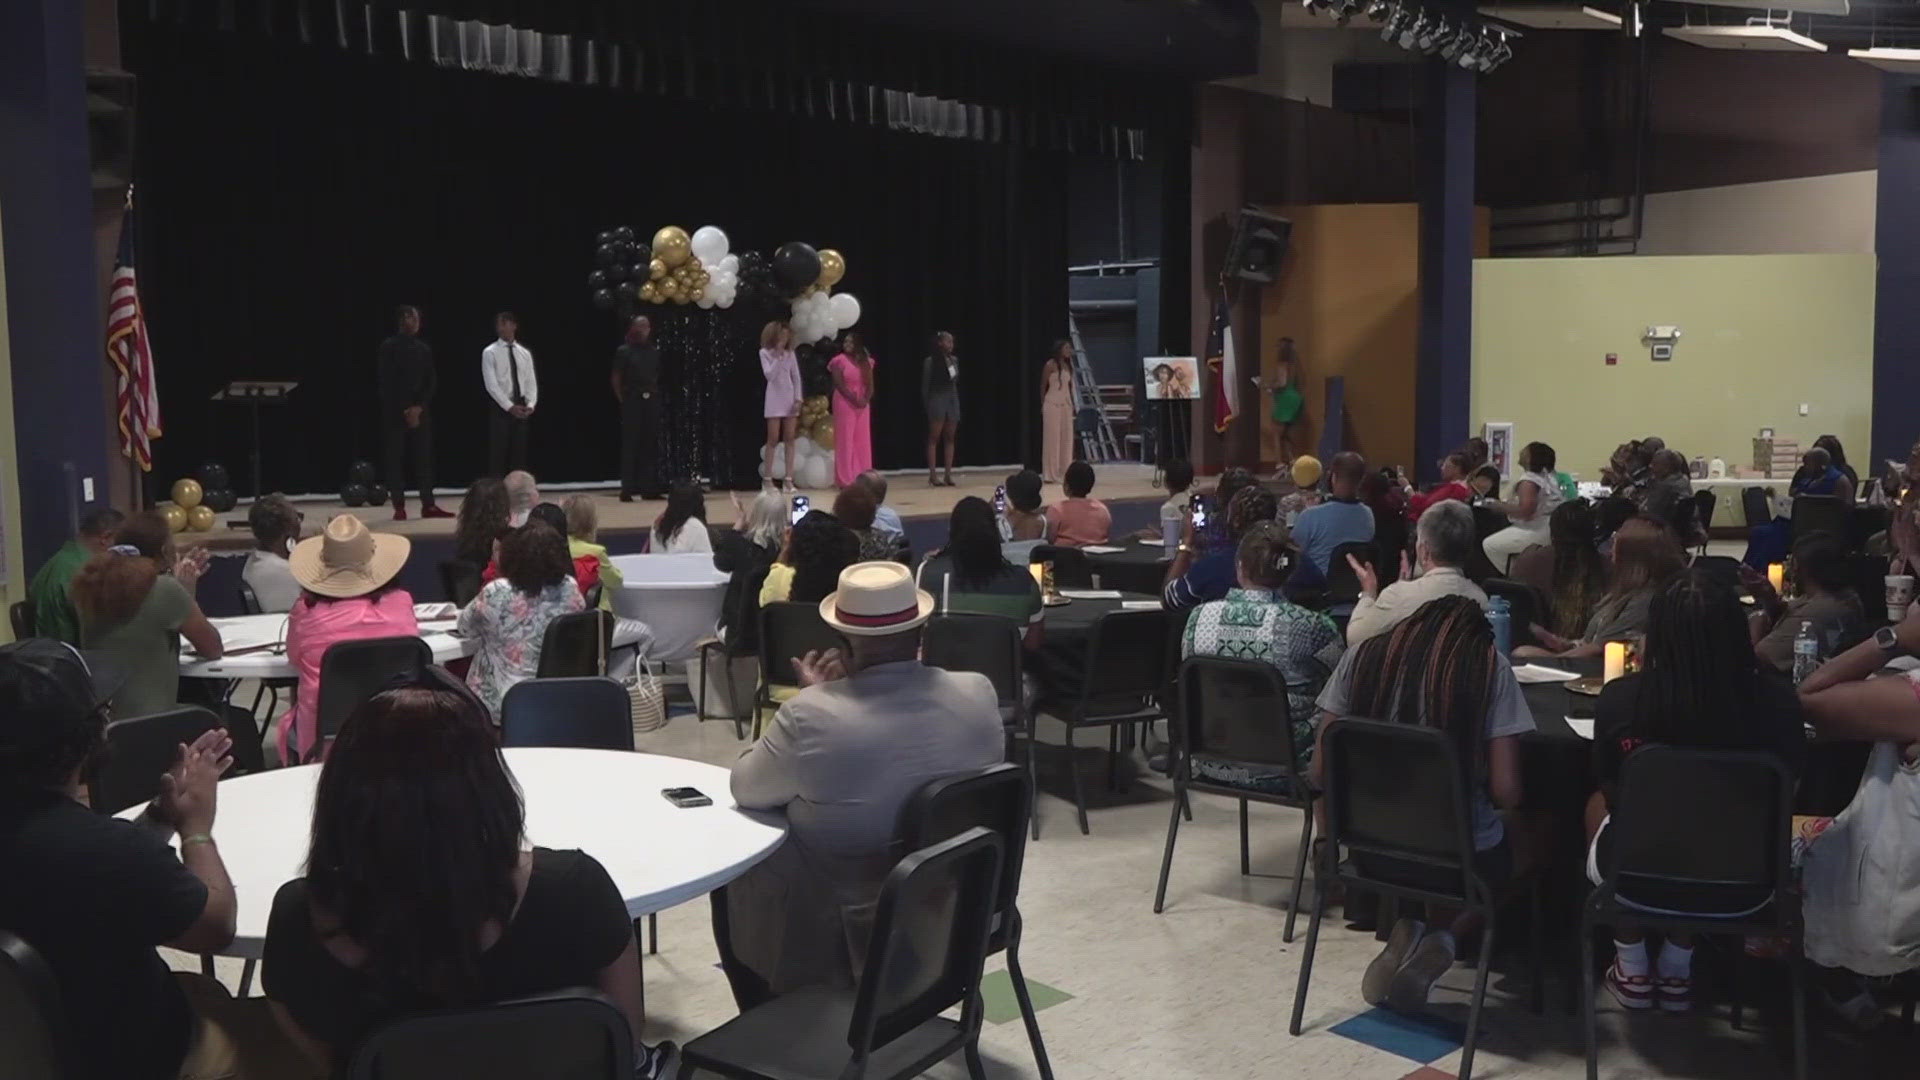 This event not only served as the kickoff for Juneteenth celebrations in Midland, but also provided valuable support to the youth in the West Texas community.